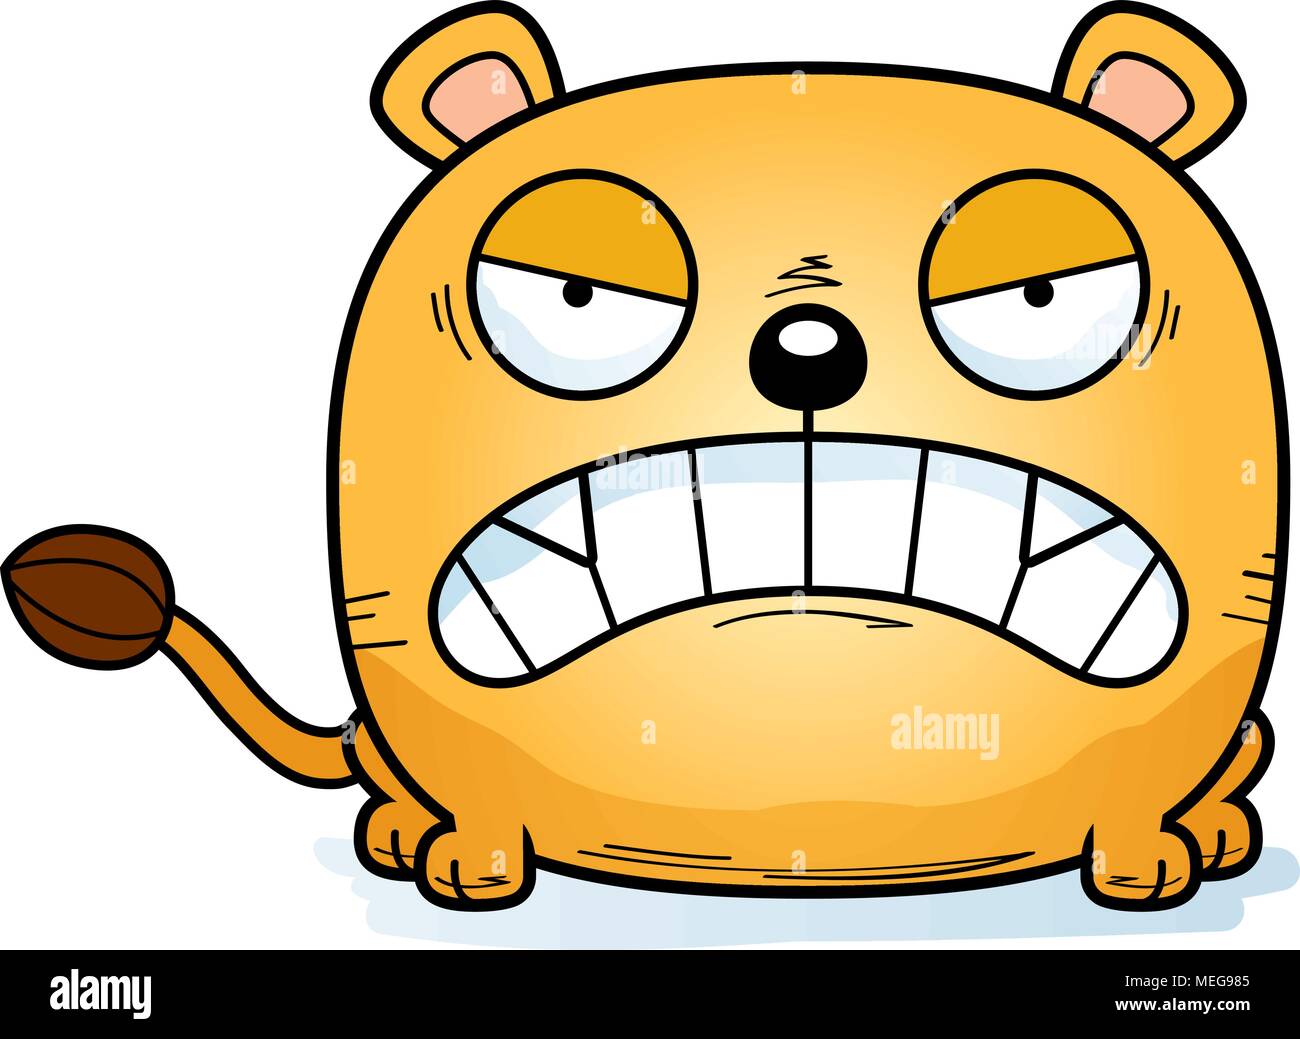 A cartoon illustration of a lioness cub with an angry expression. Stock Vector